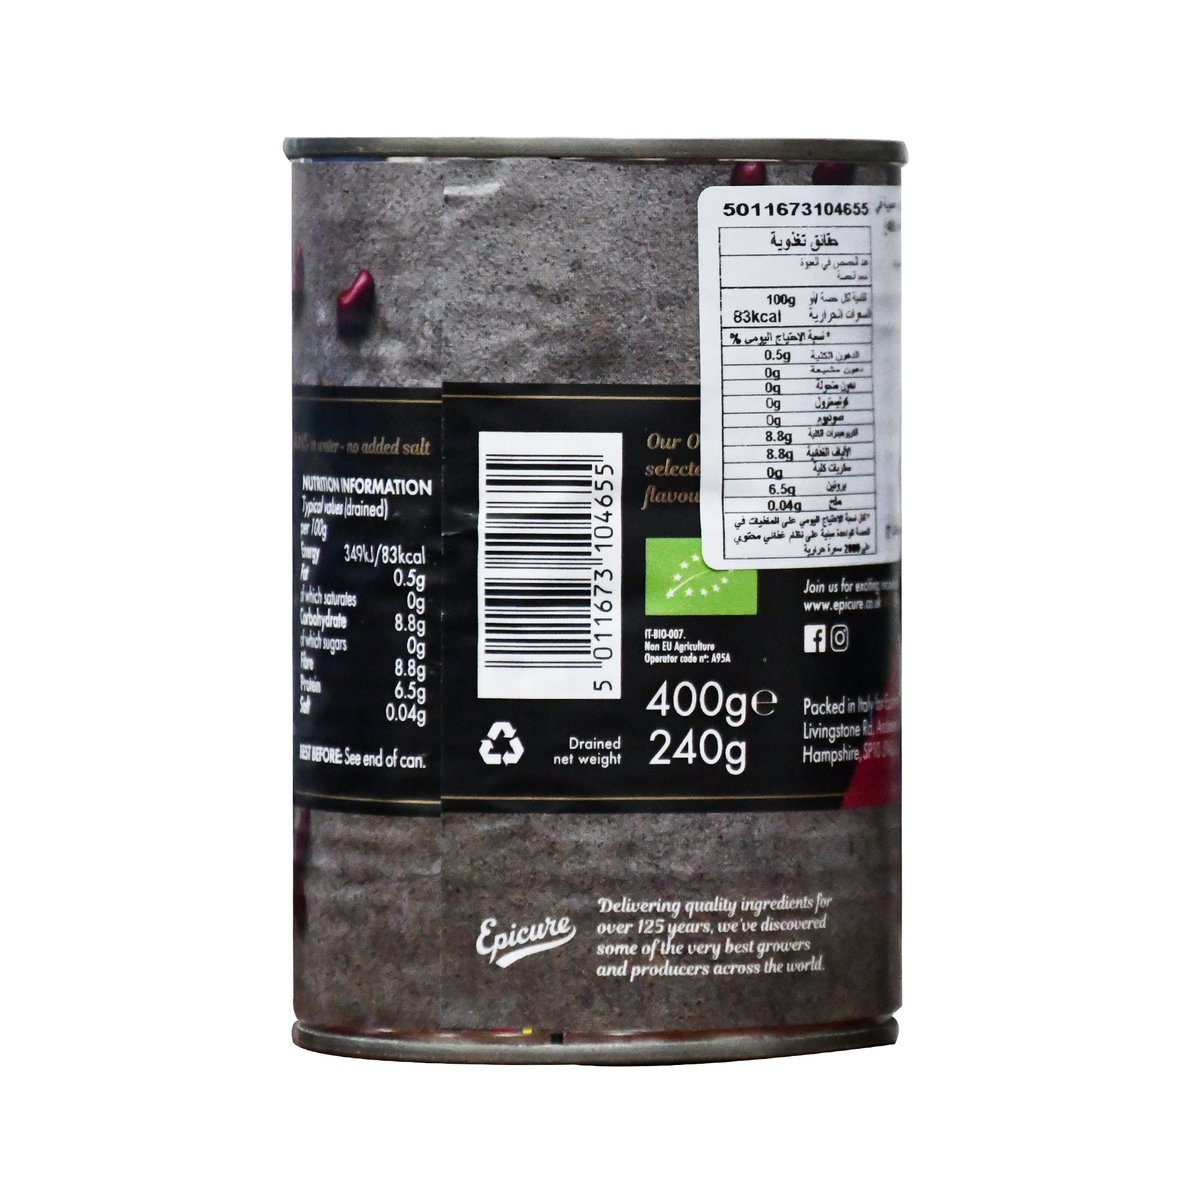 Epicure Organic Red Kidney Beans 400 g